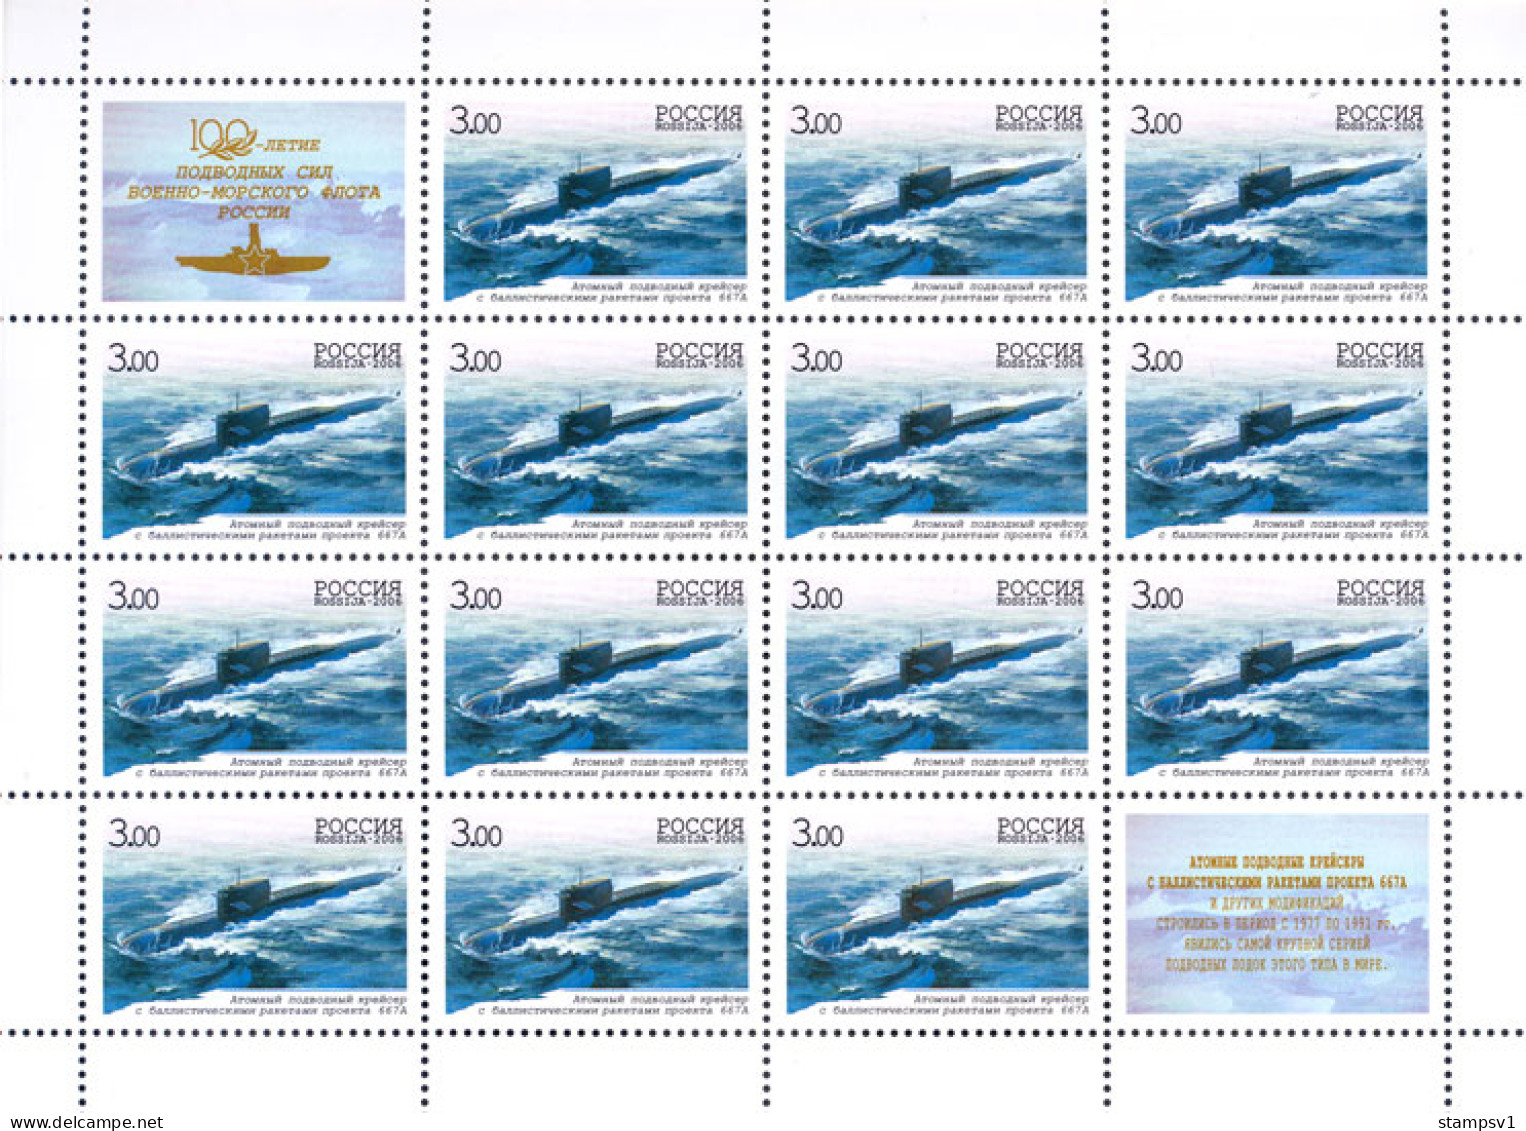 Russia 2006 The 100th Anniversary Of The Russian Navy Underwater Forces. Mi 1311-14 4 Klb - Sous-marins